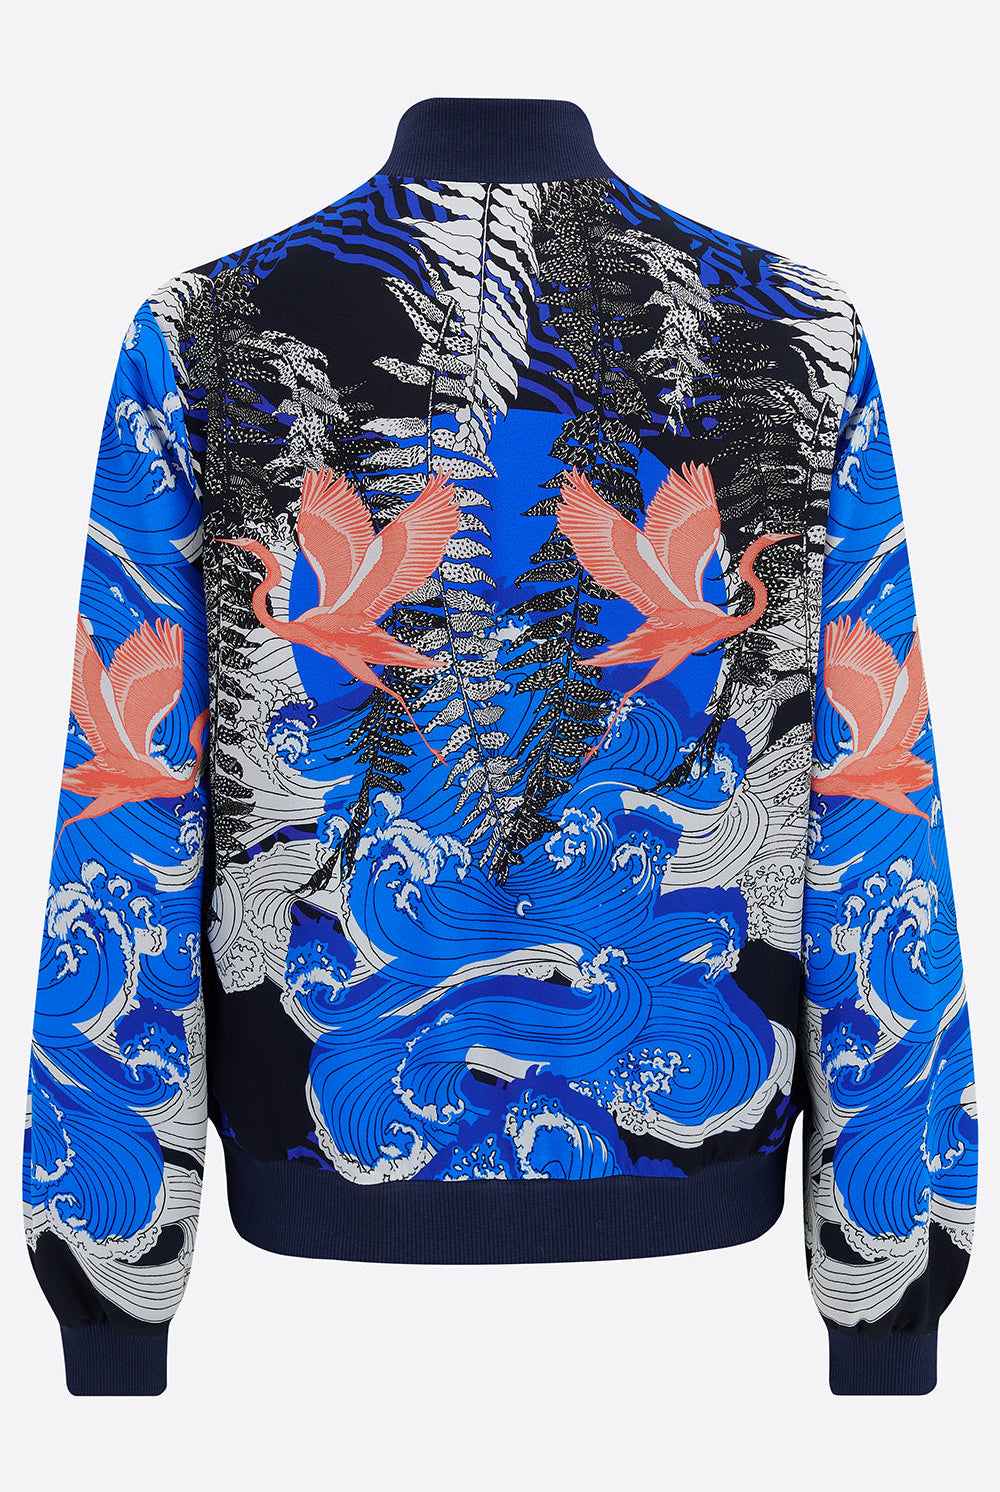 Back of silk bomber jacket in blue, white and coral with waves and birds design